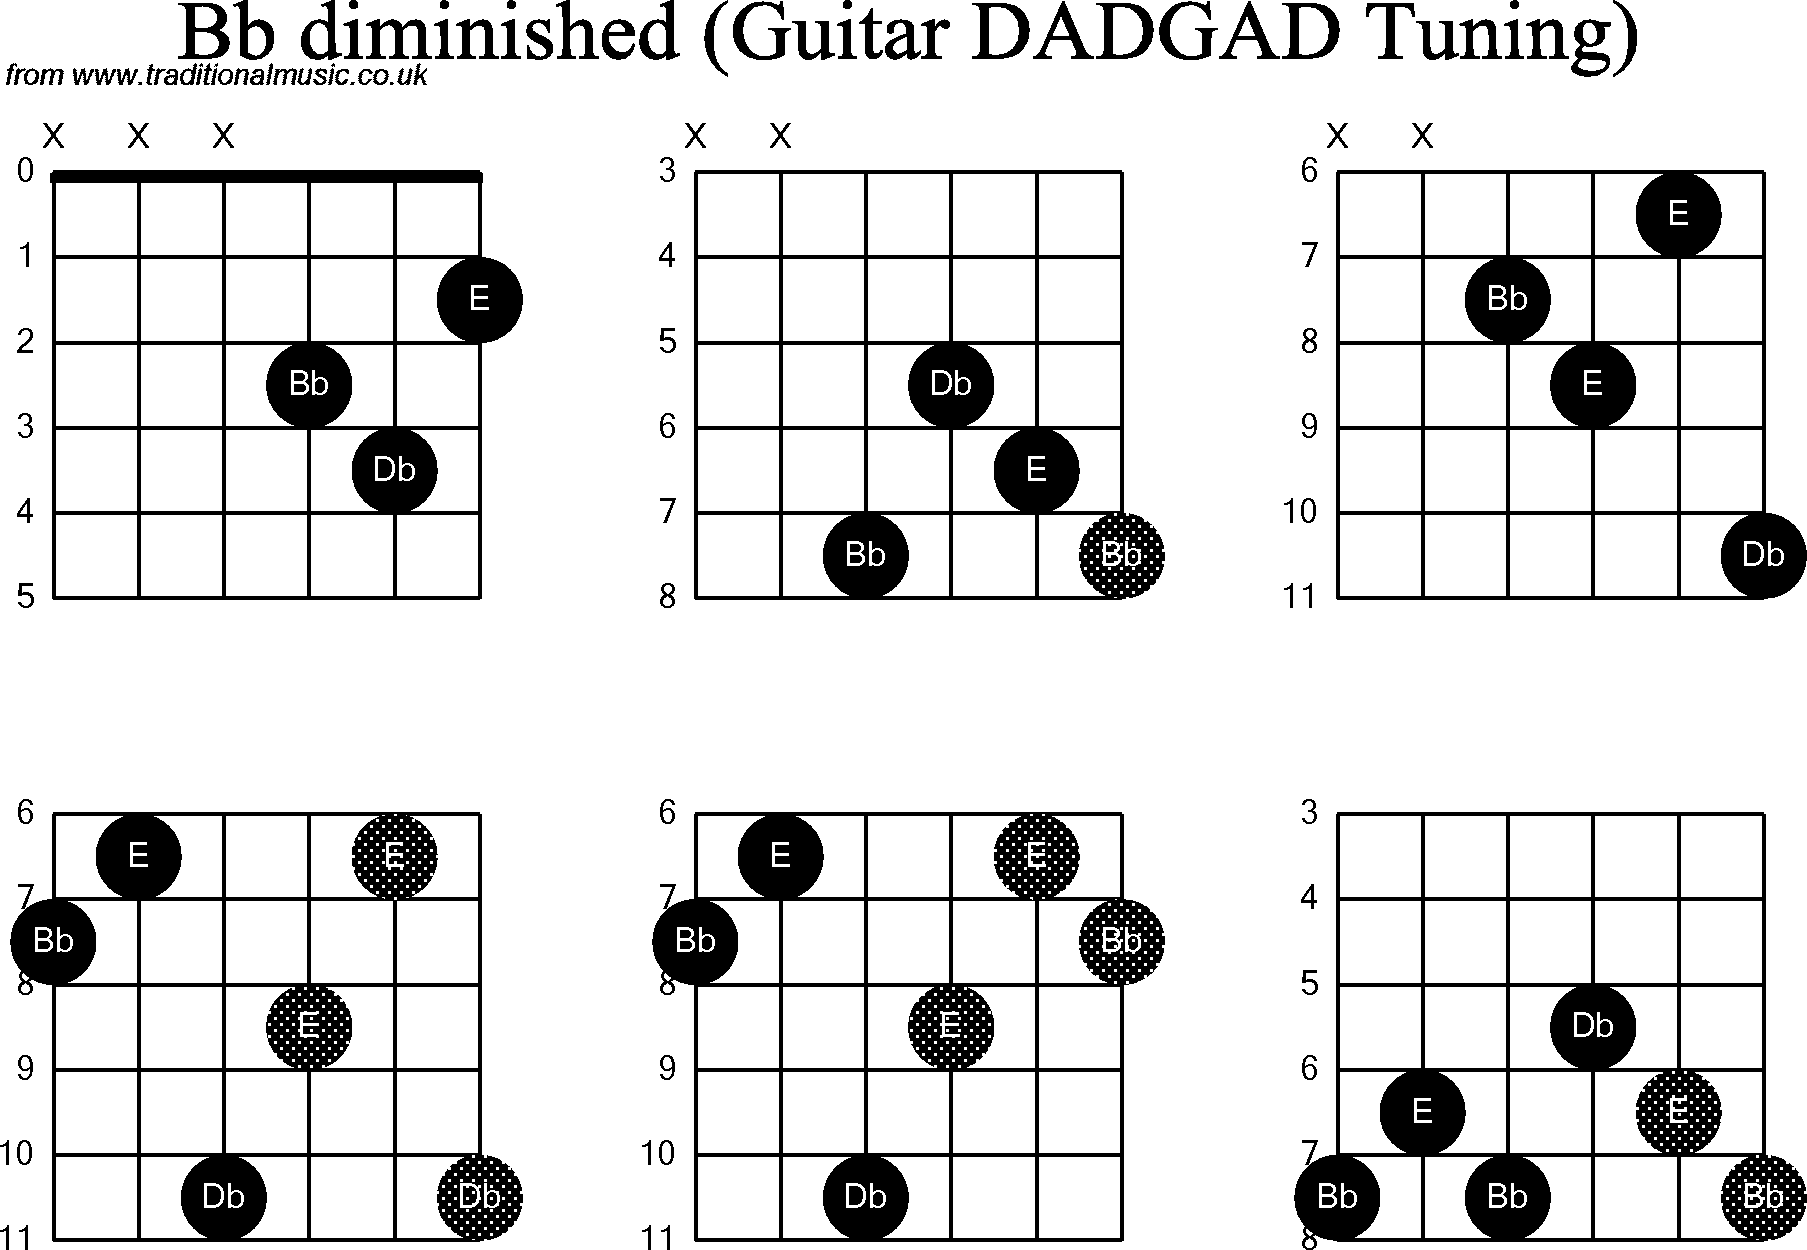 Chord Diagrams for D Modal Guitar(DADGAD), Bb Diminished